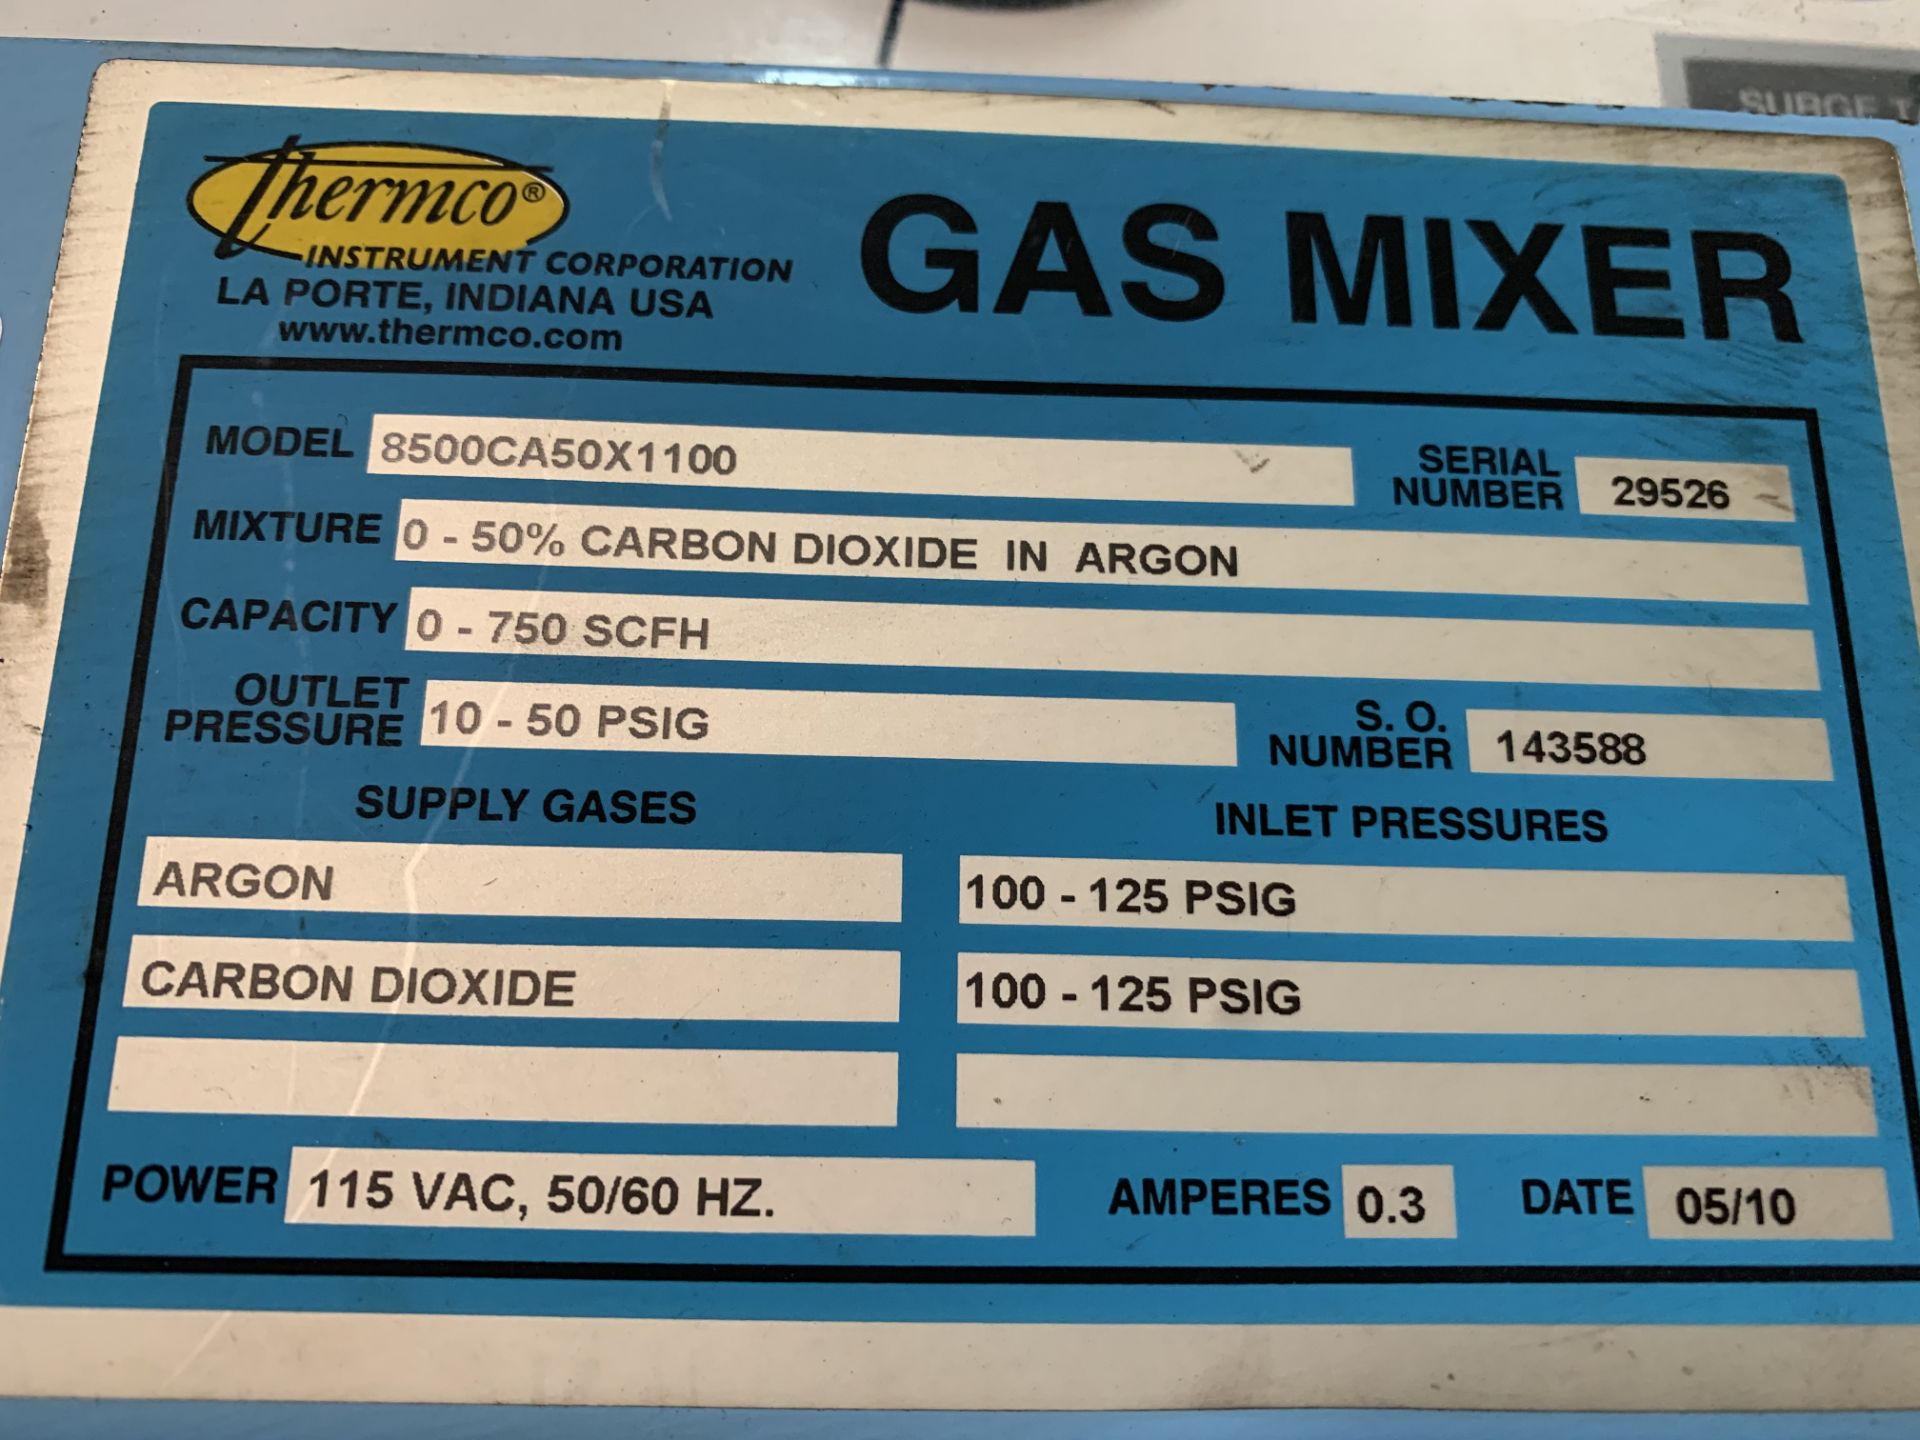 Thermco 8500CA50X1100 Gas Mixer Argon/CO2, 0-750 SCFH, 10-50PSI Outlet Pressure, S/N: 29526 - Image 3 of 3